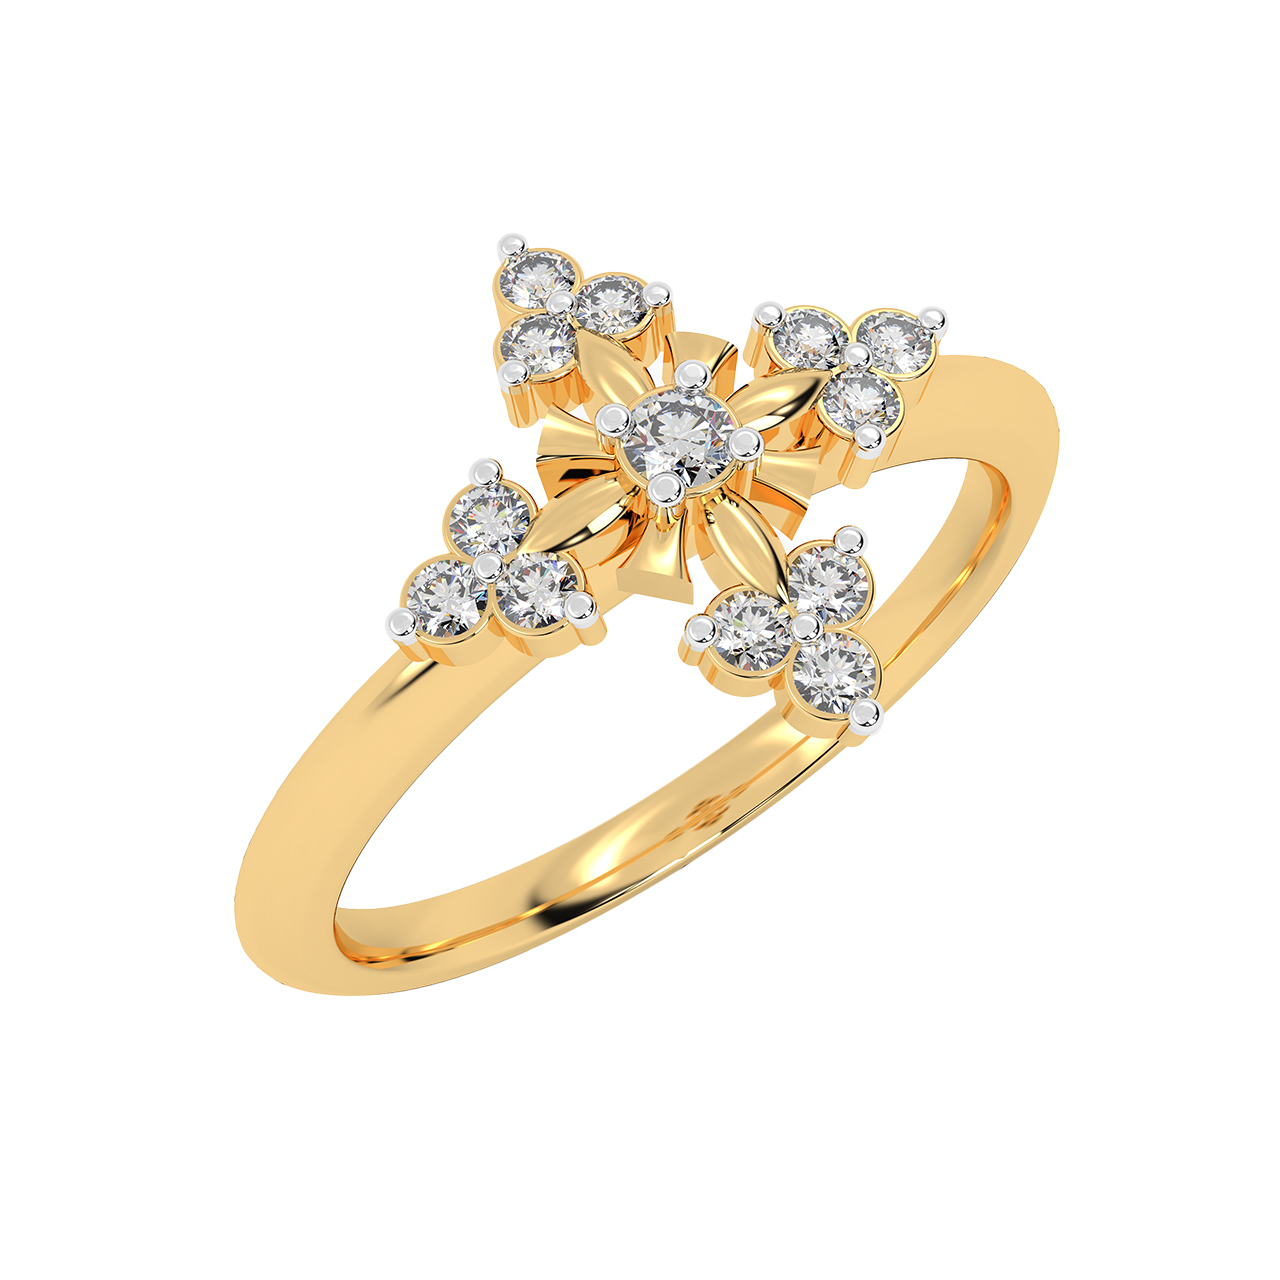 Buy Candere by Kalyan Jewellers 18k Diamond Ring Online At Best Price @  Tata CLiQ